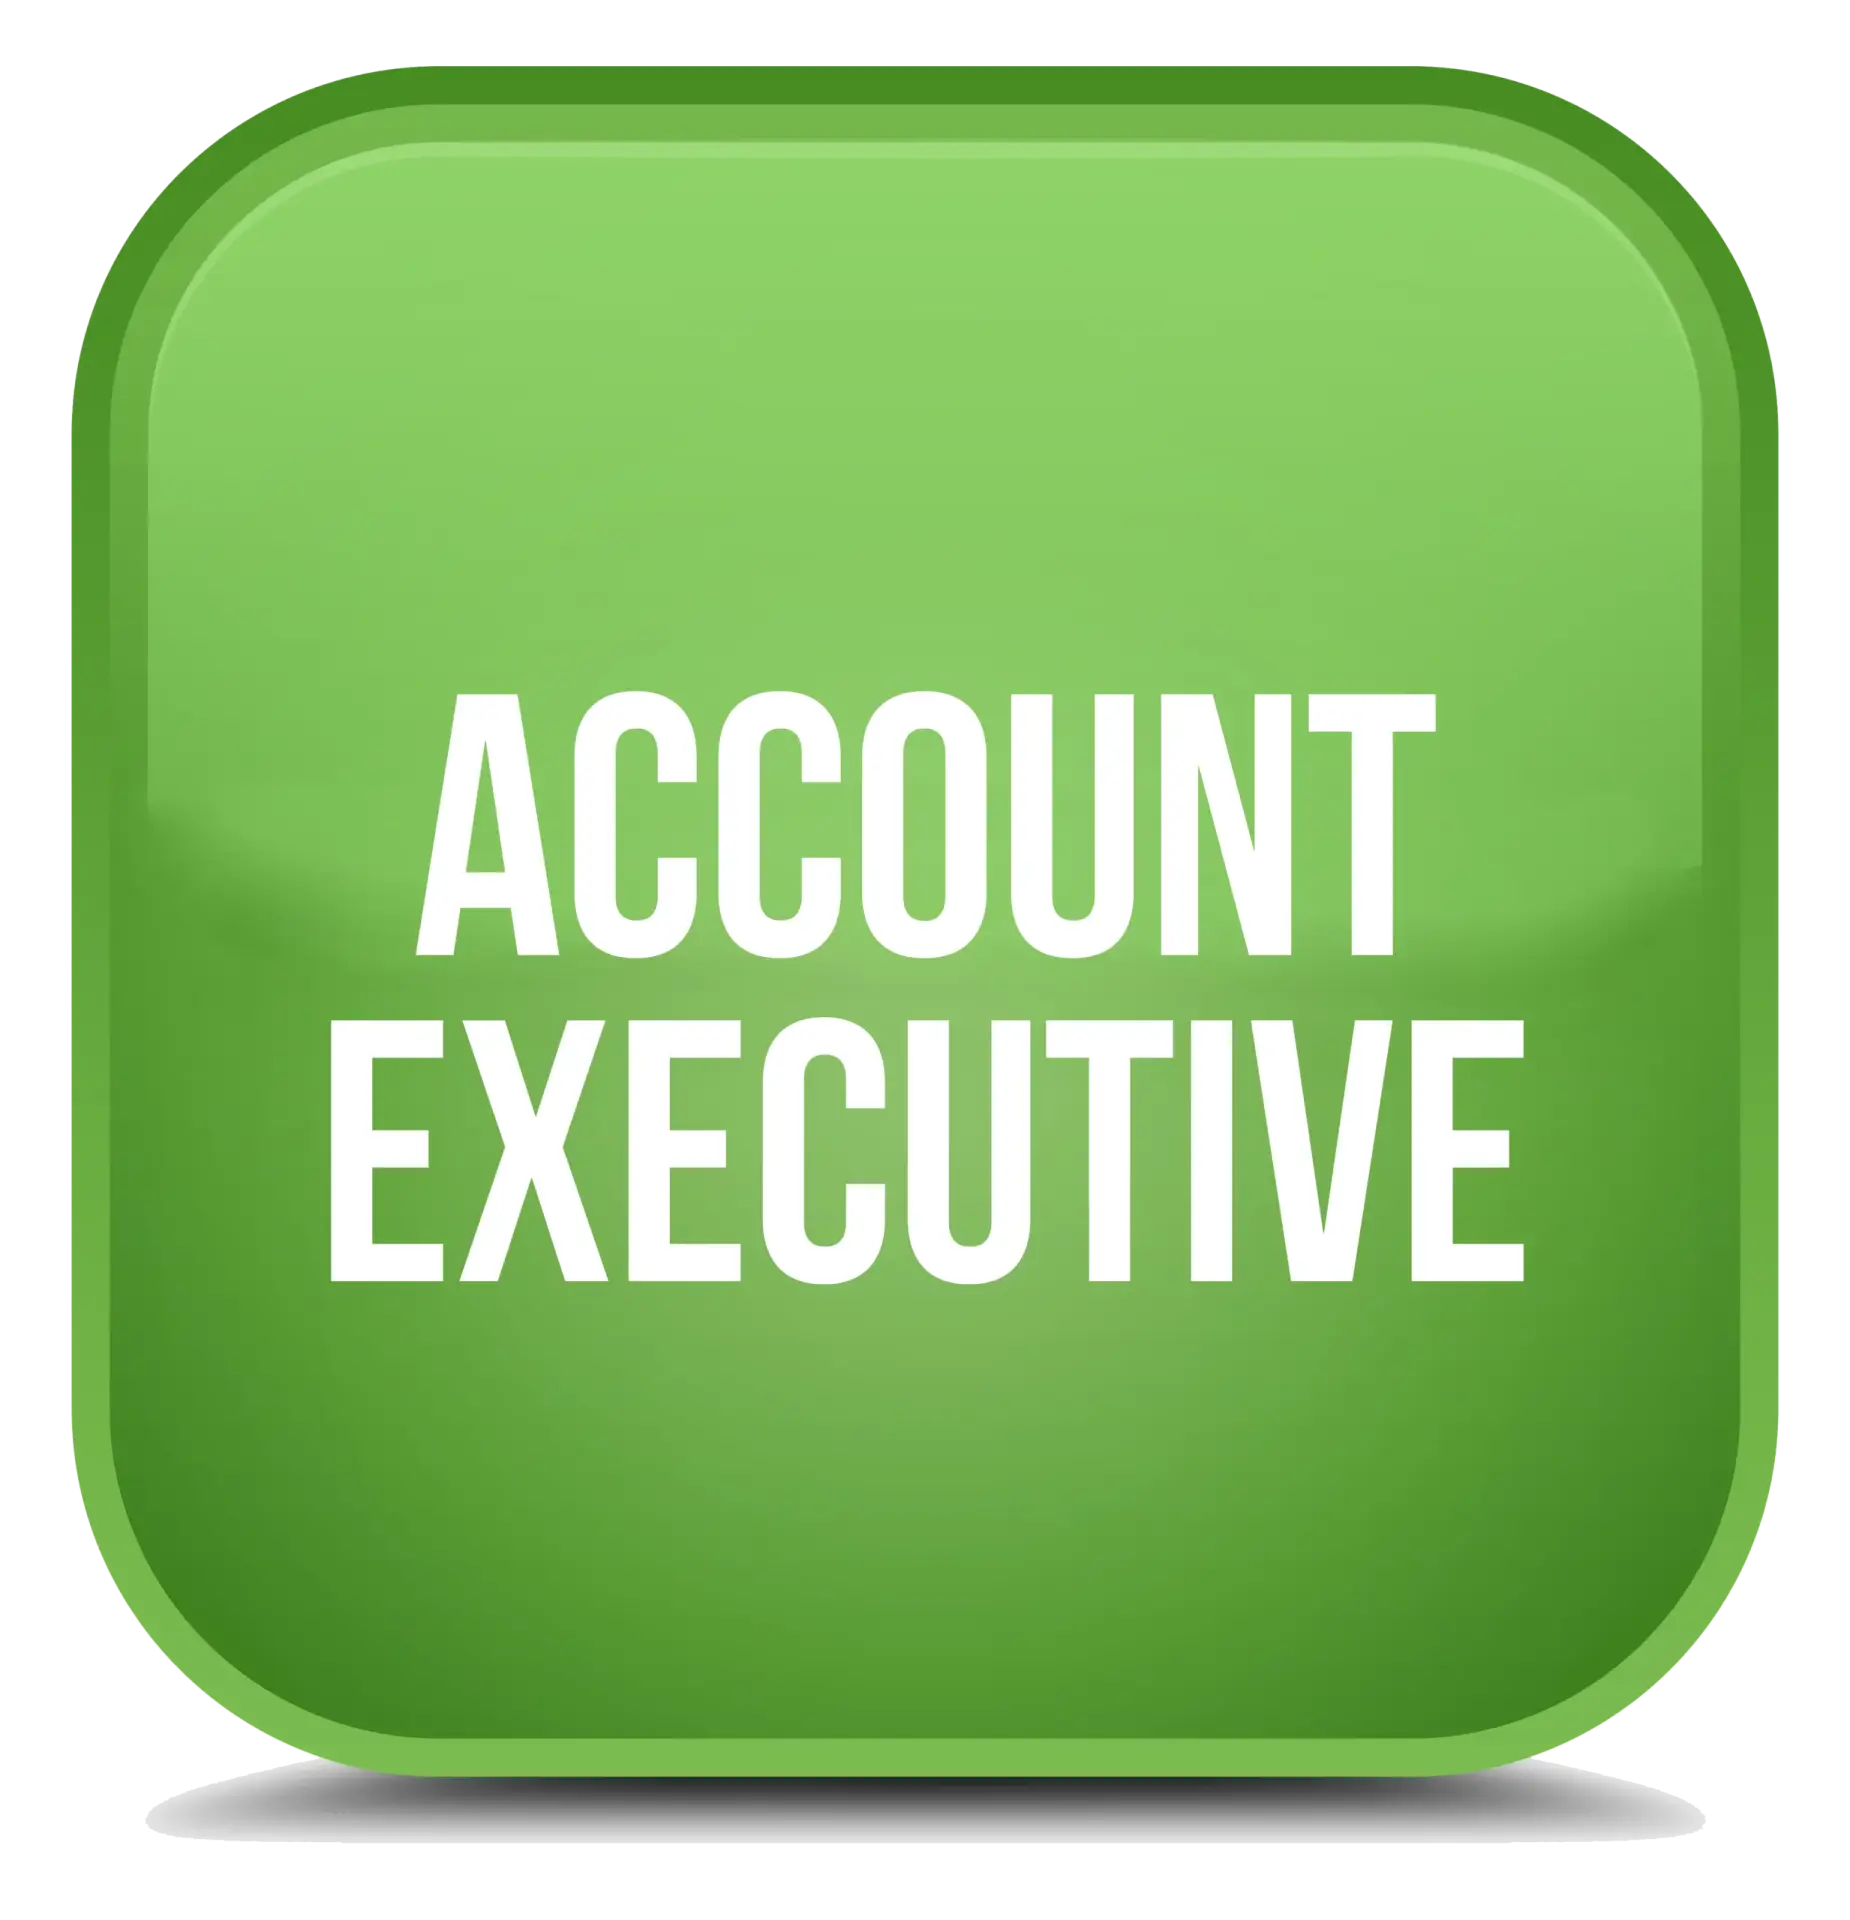 green button with white letters Account Executive indicating IT Enabled is hiring for Account executive.